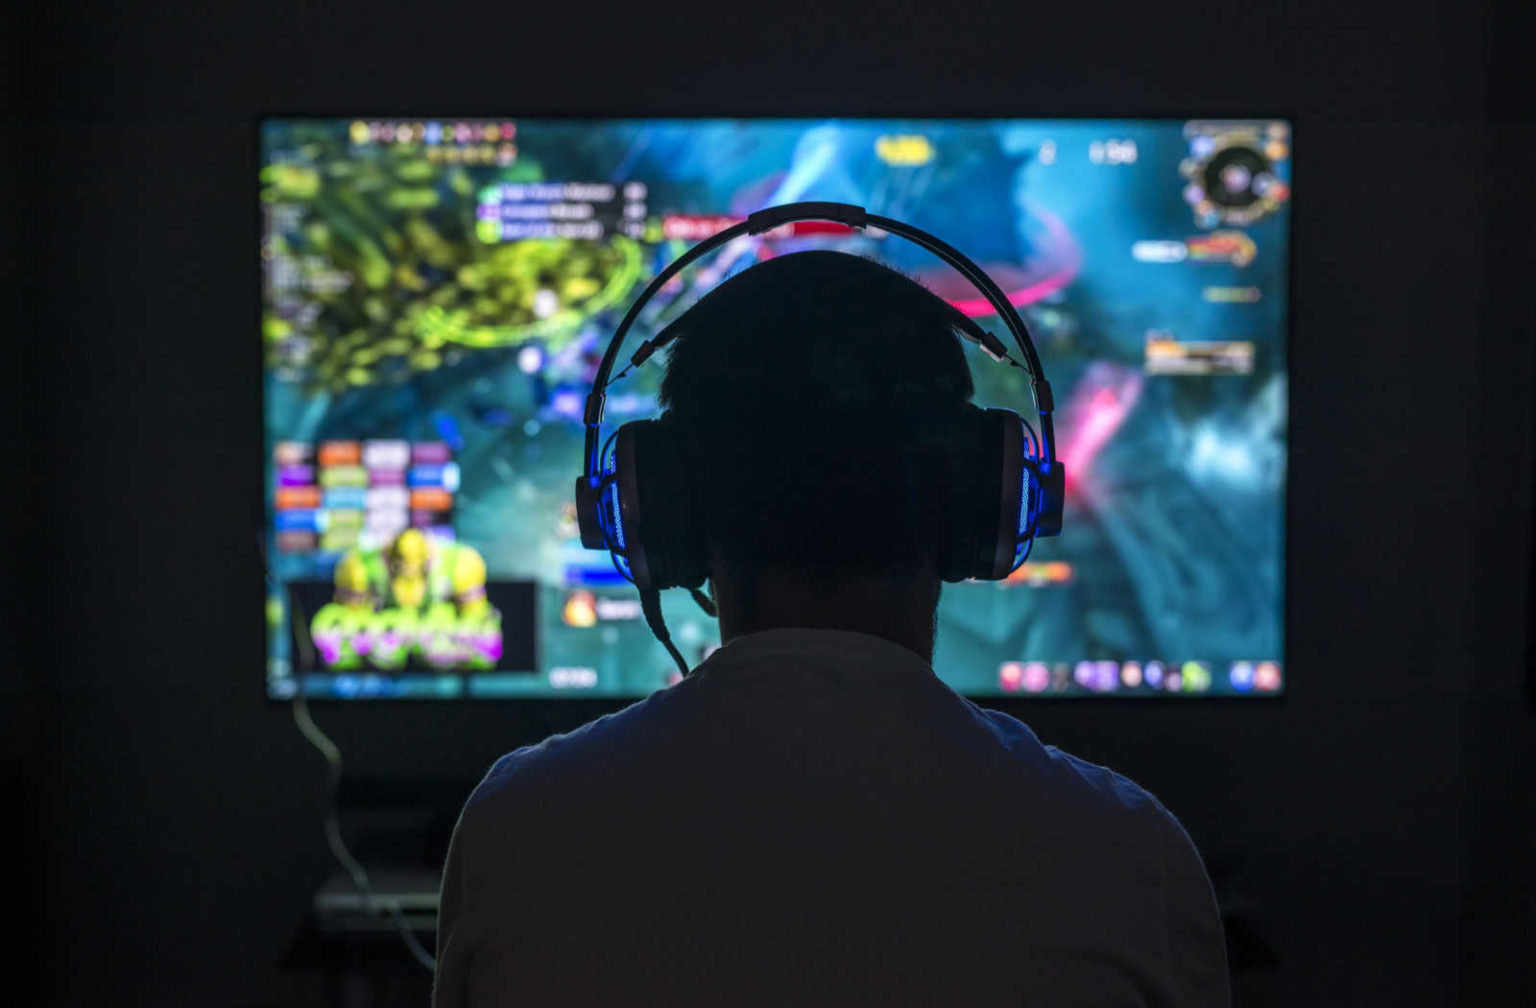 61% of children have been contacted by strangers playing games online